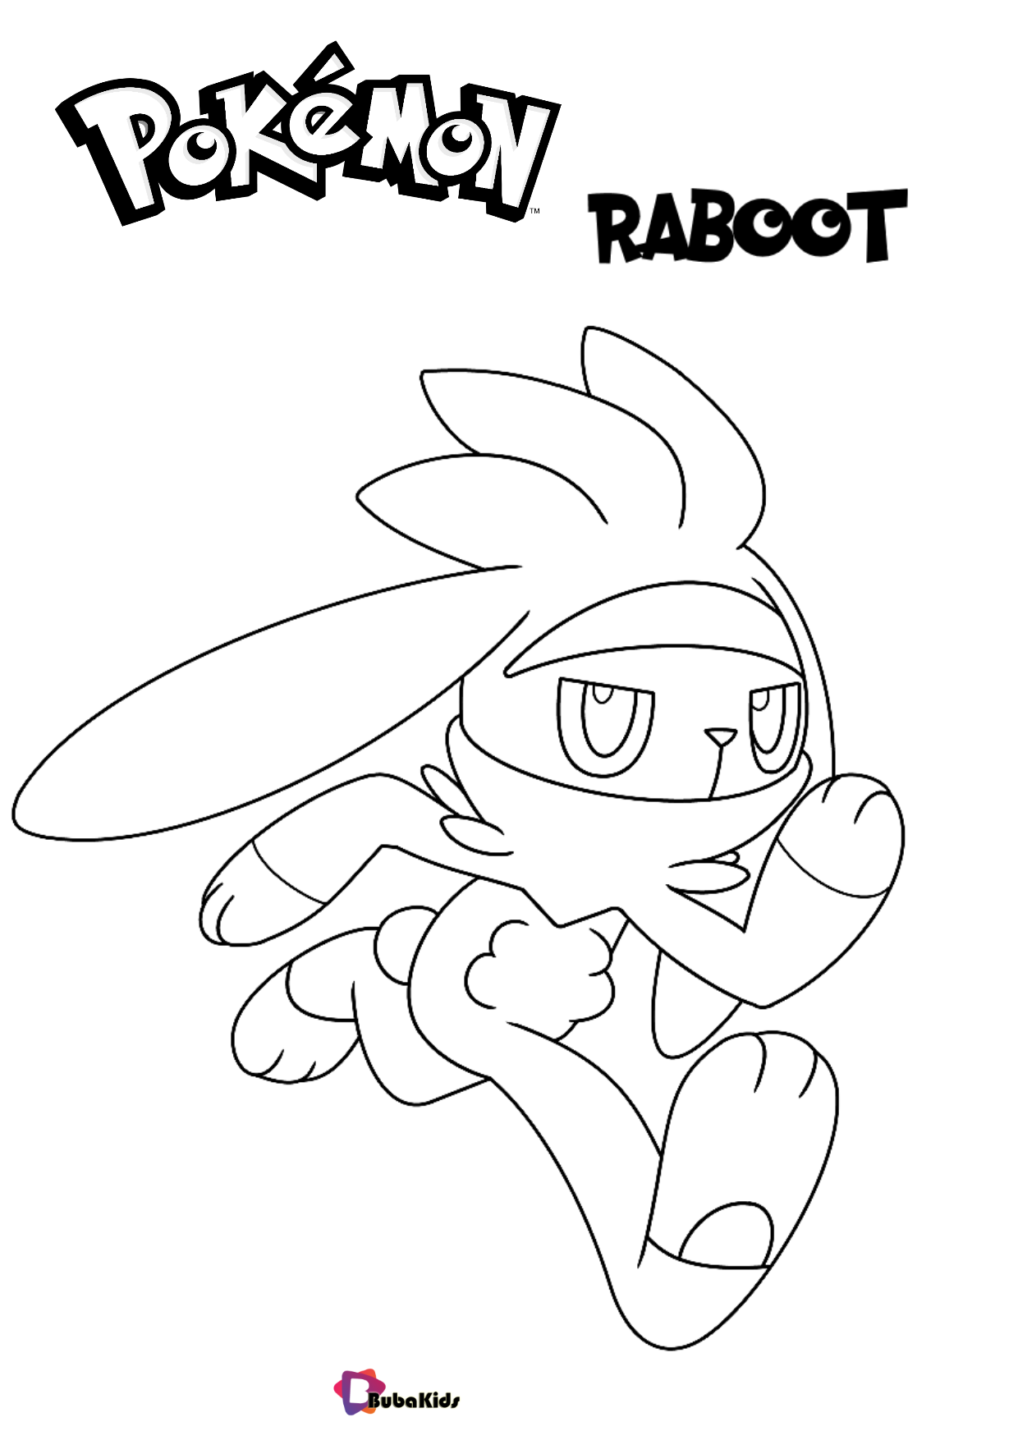 pokemon raboot coloring pages